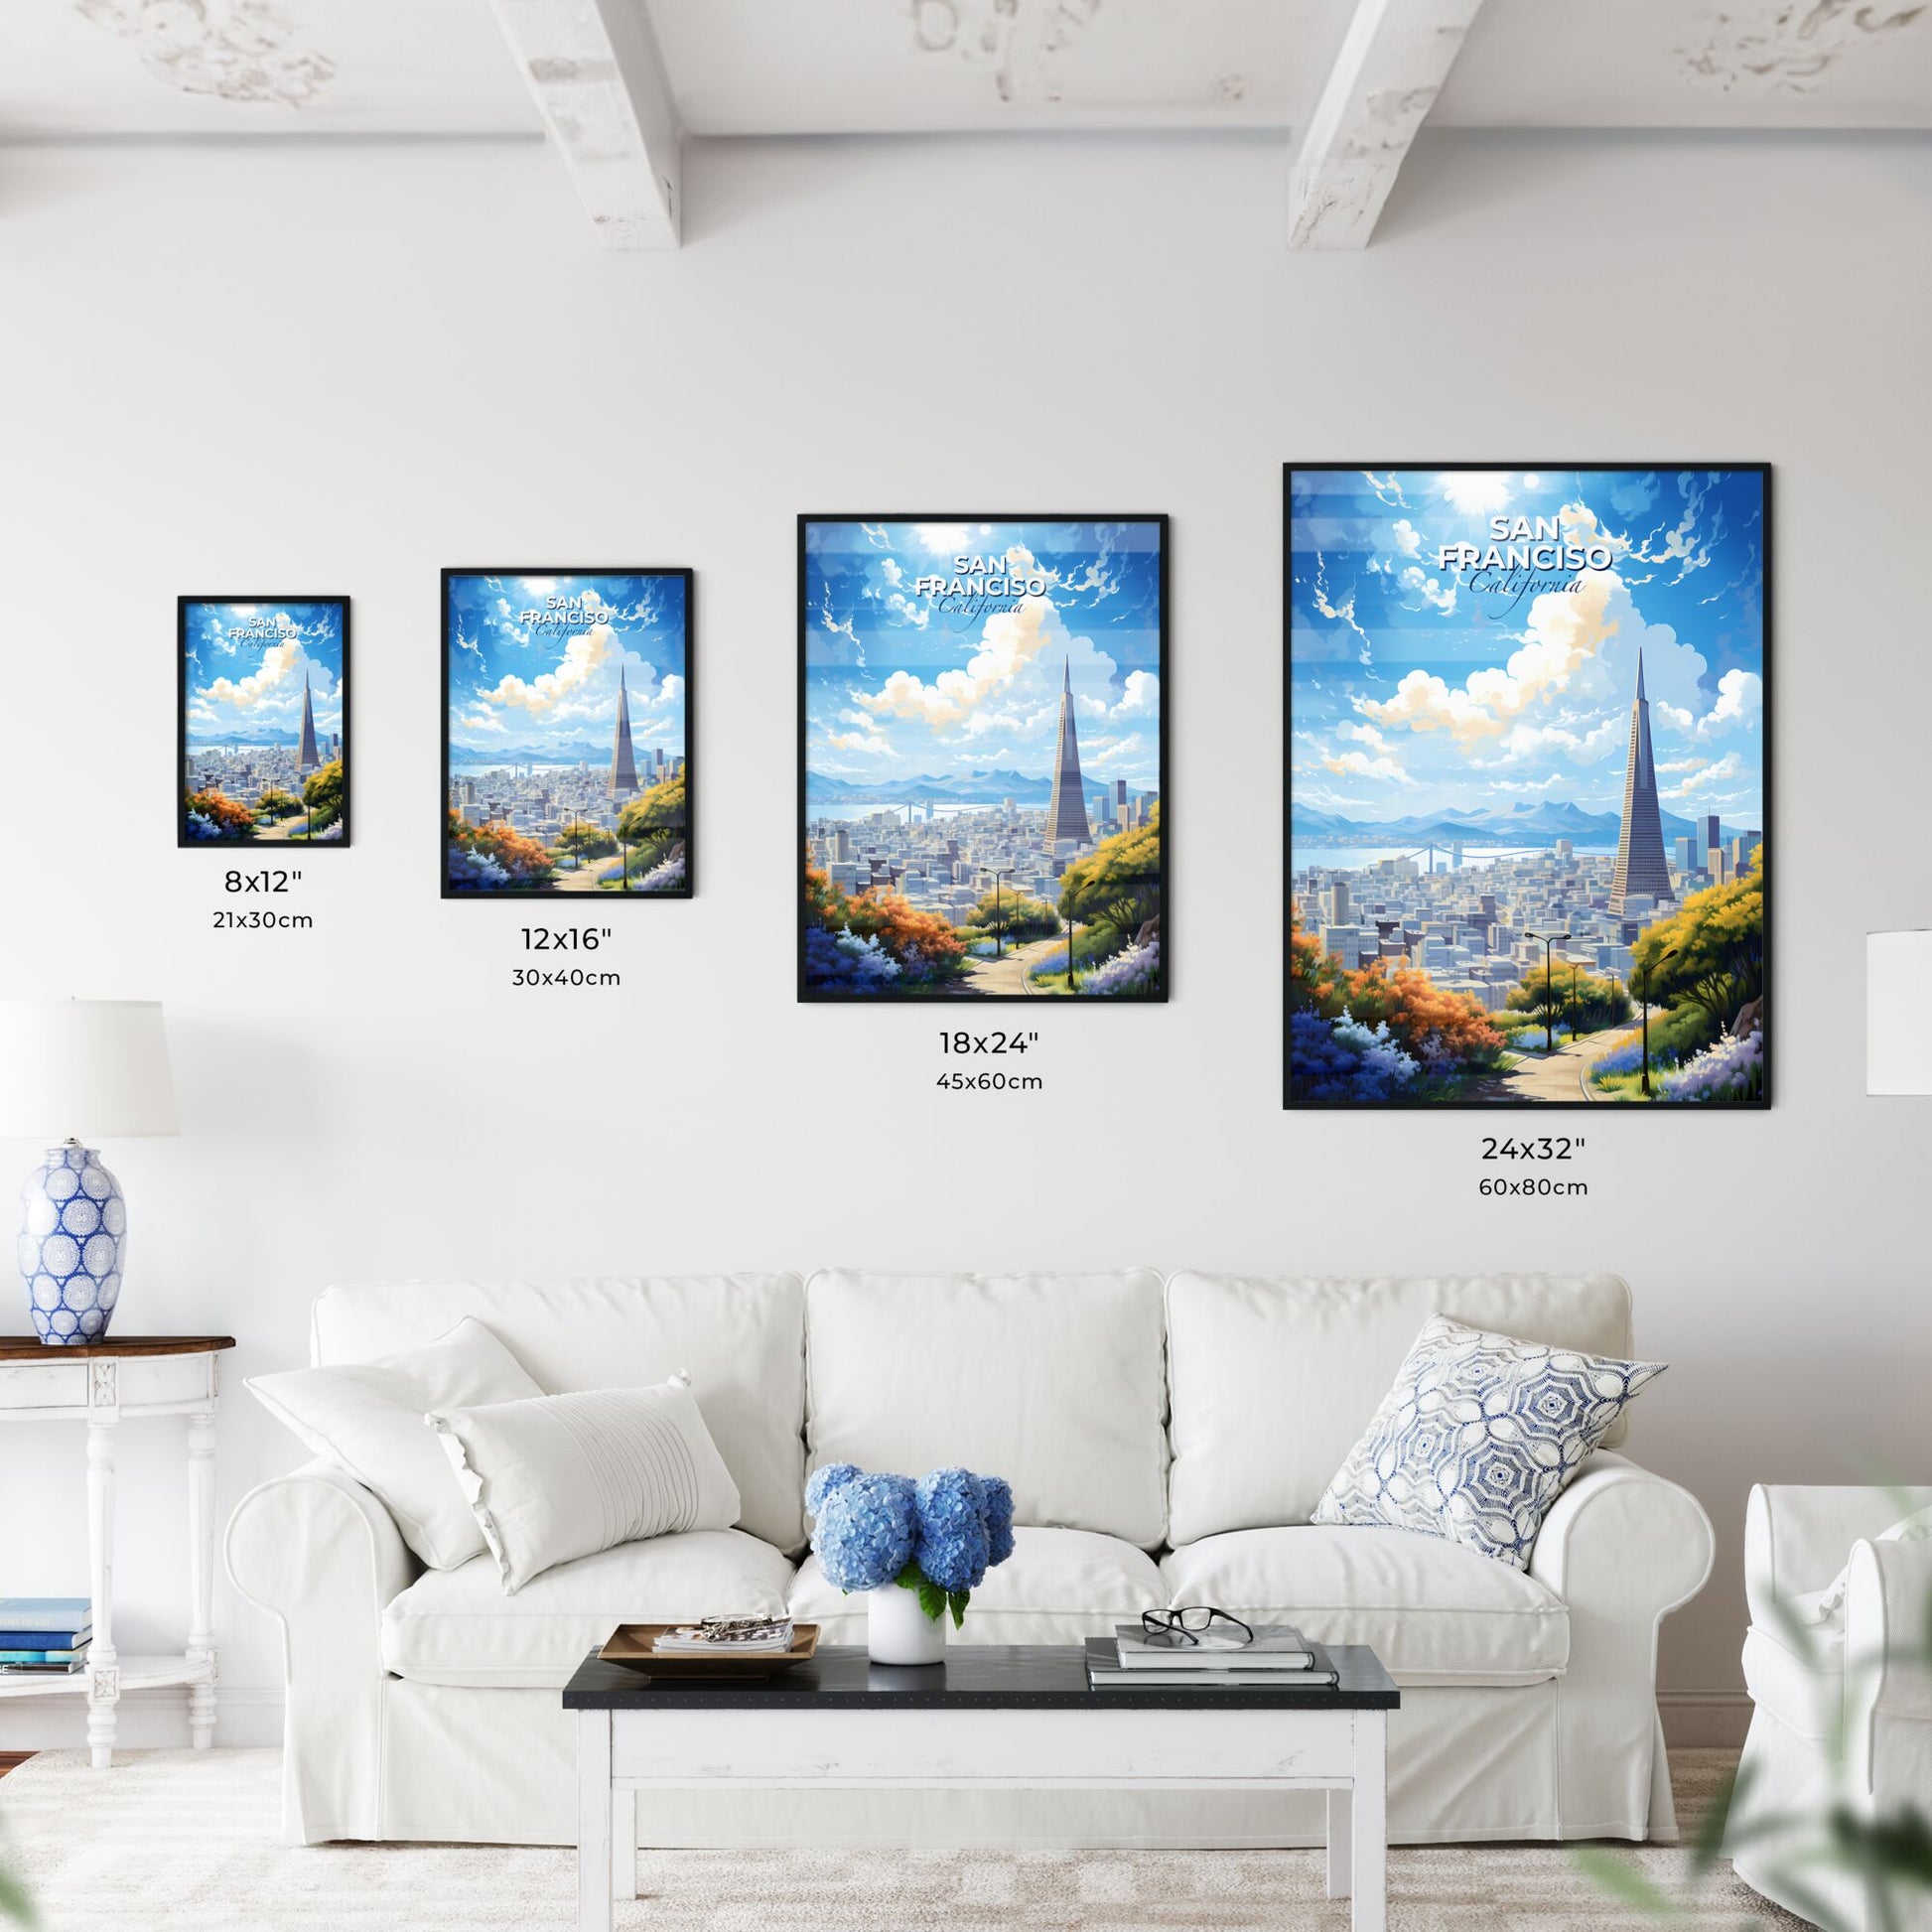 San Franciso Skyline - A City Landscape With A Tall Tower And Trees - Customizable Travel Gift Default Title